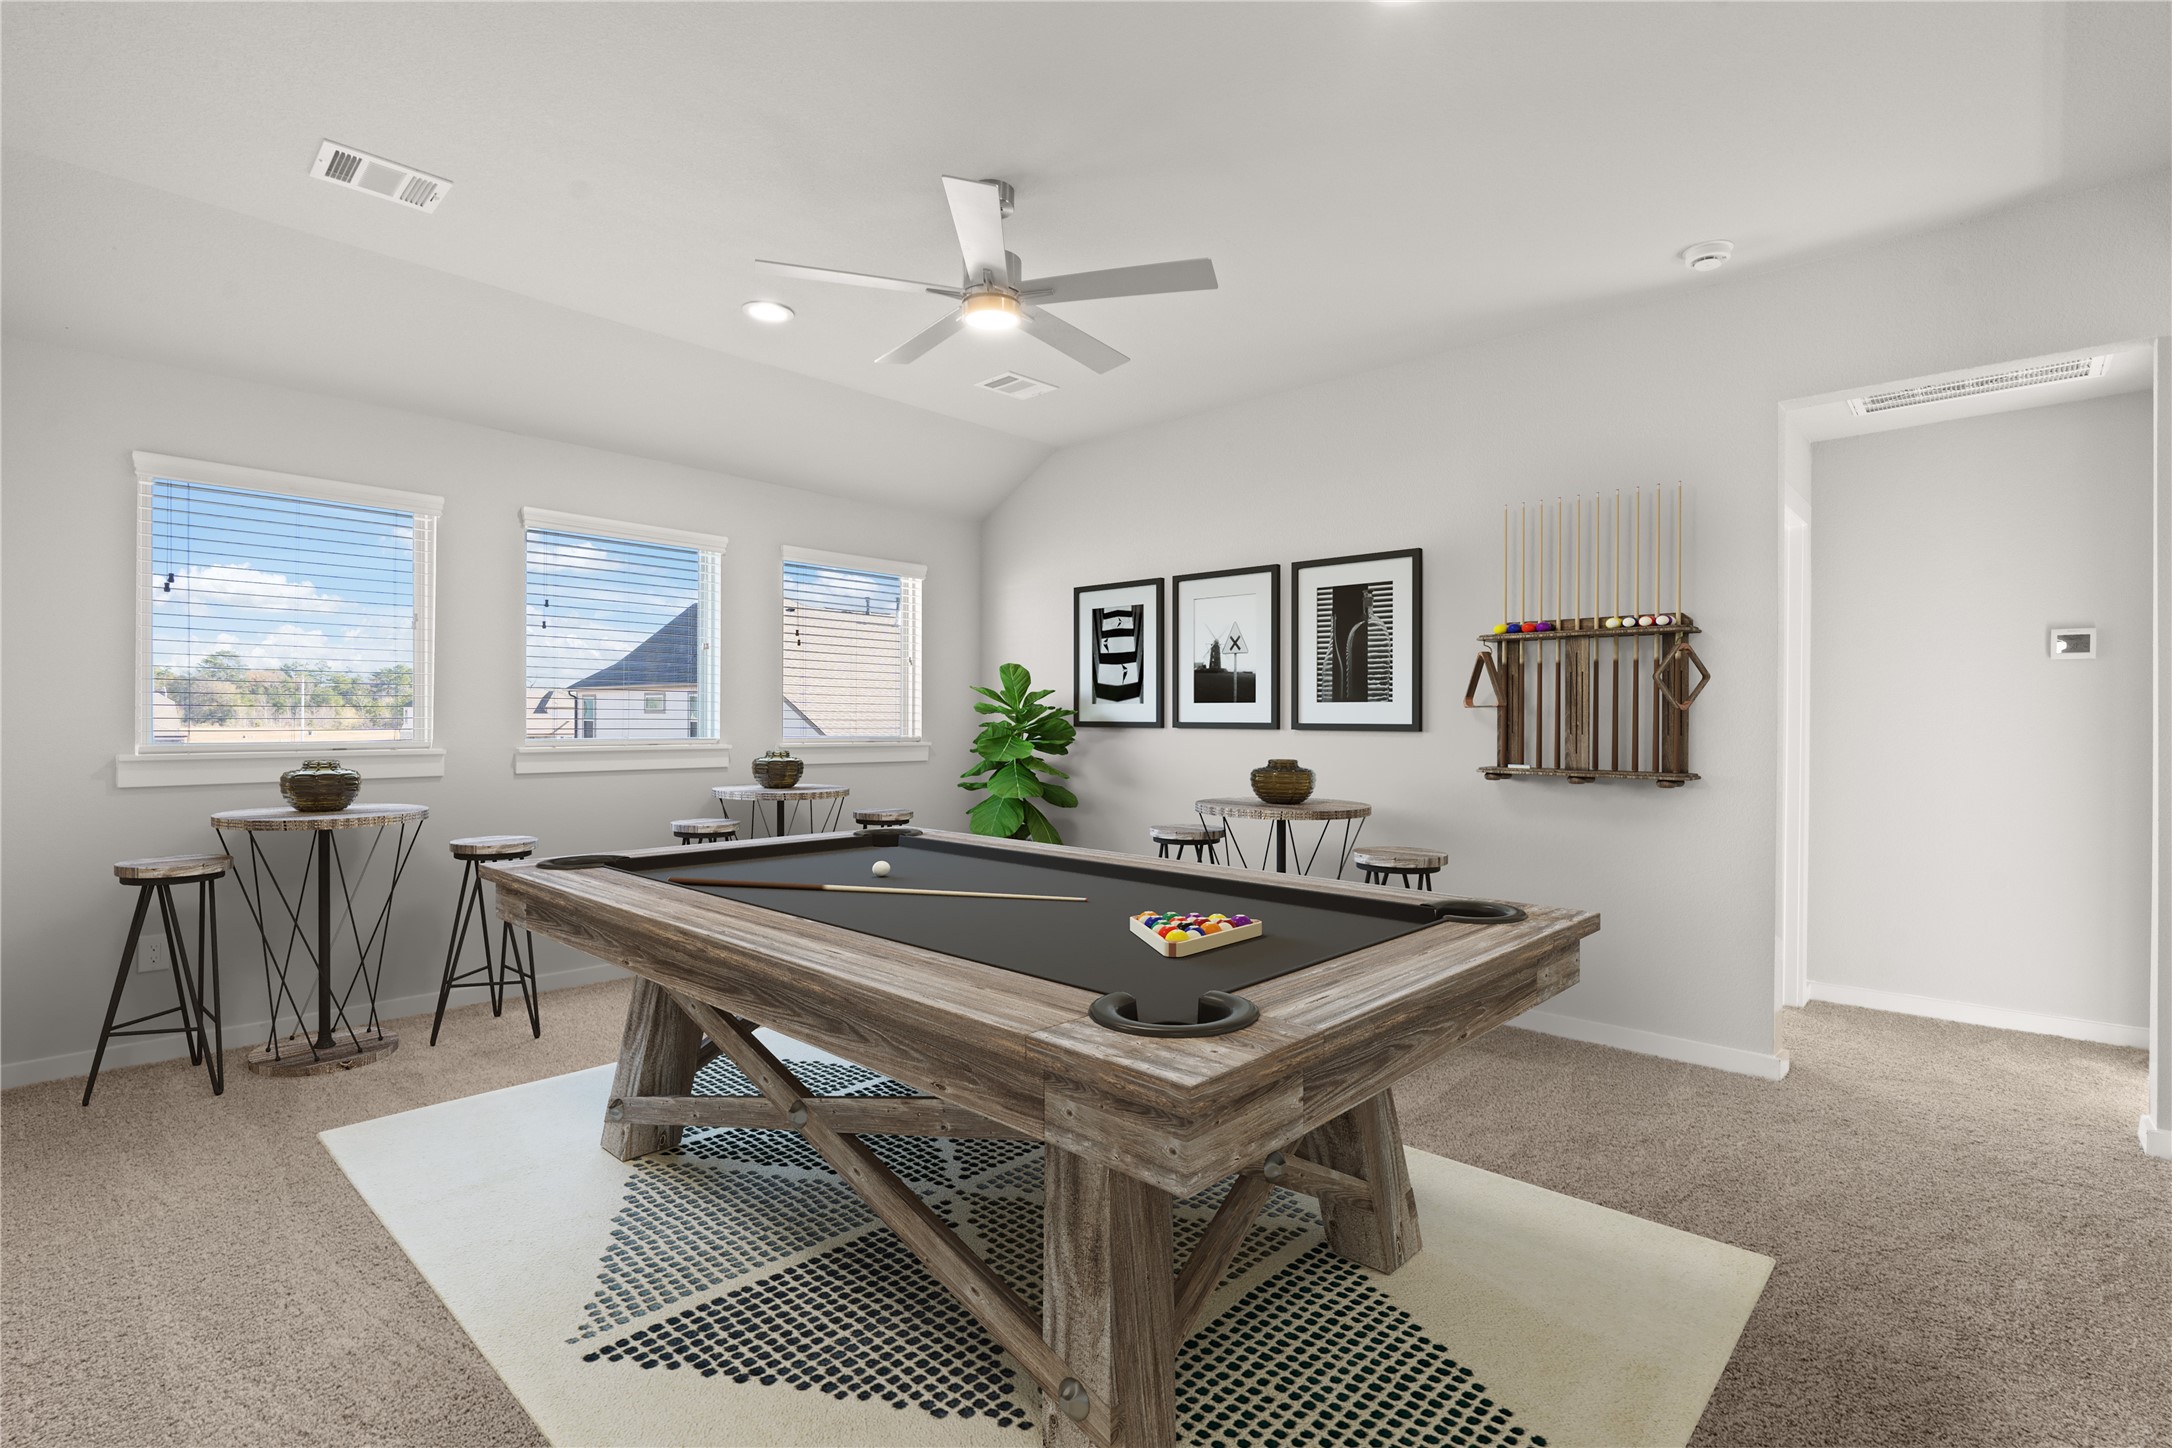 Come upstairs and enjoy a day of leisure in this fabulous game room! This is the perfect hangout spot or adult game room, this space features plush carpet, high ceiling, recessed lighting, custom paint and large windows with privacy blinds.